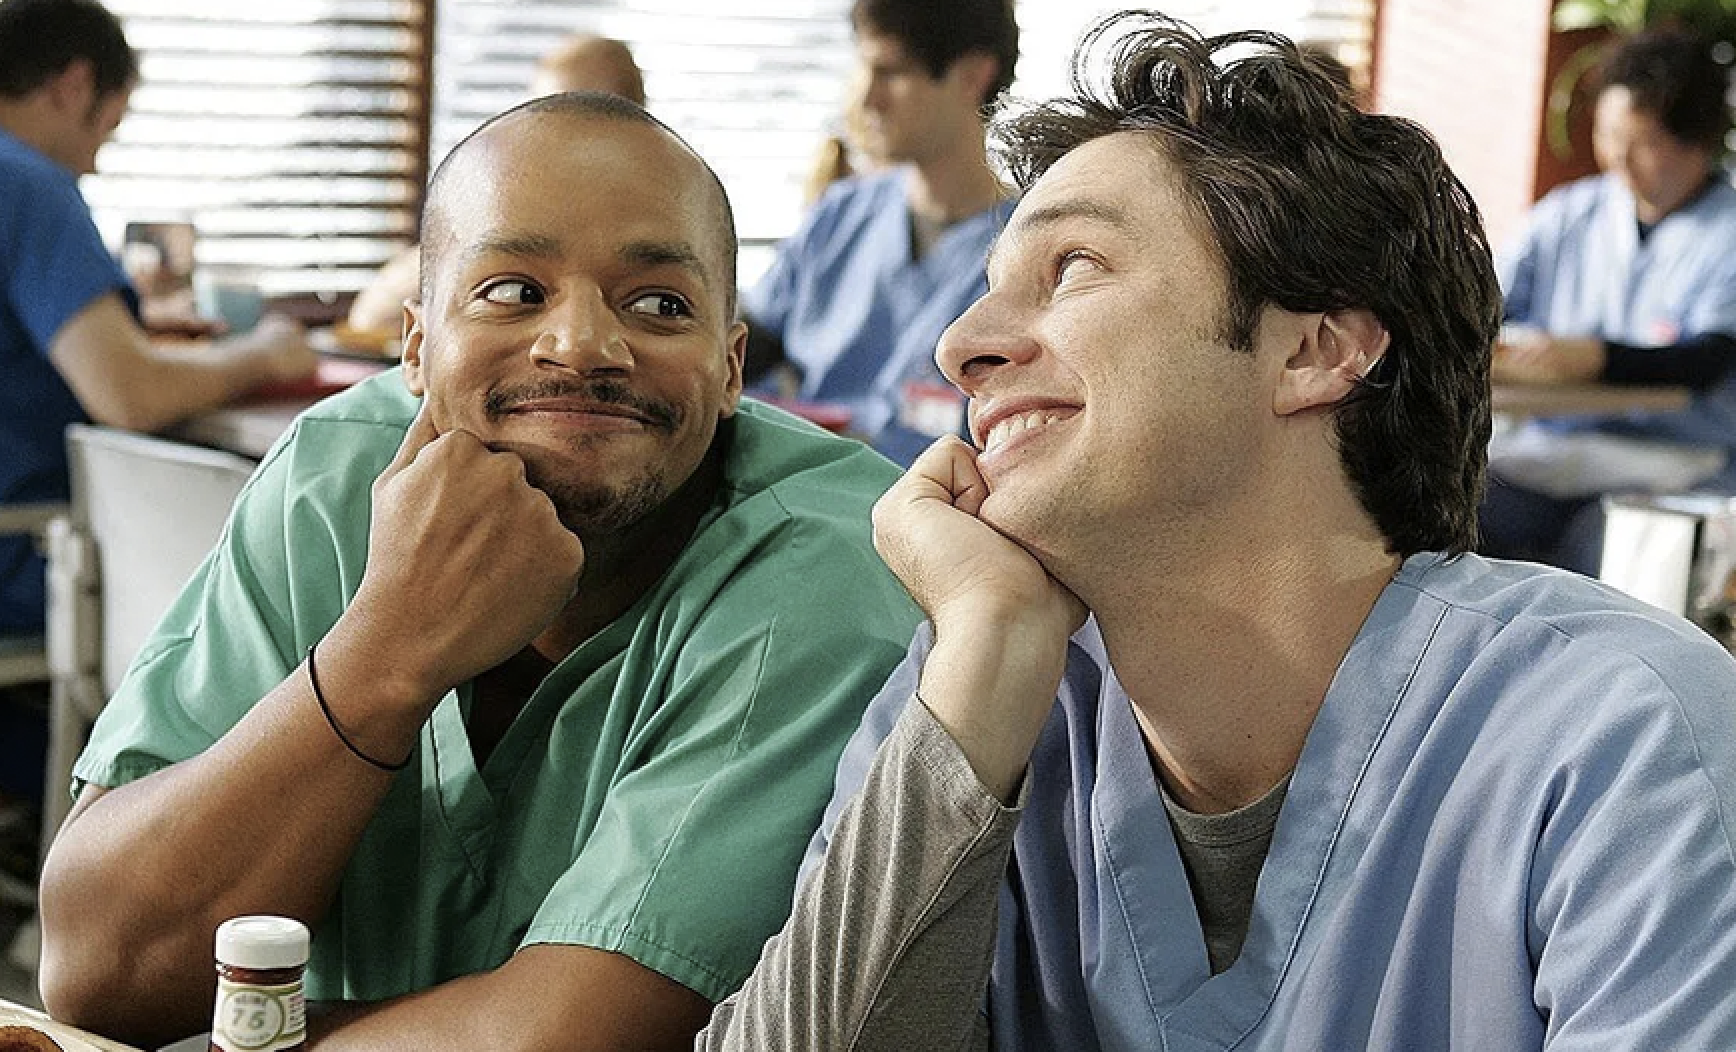 Donald Faison as Turk and Zach Braff as JD looking lovingly at each other in &quot;Scrubs&quot;